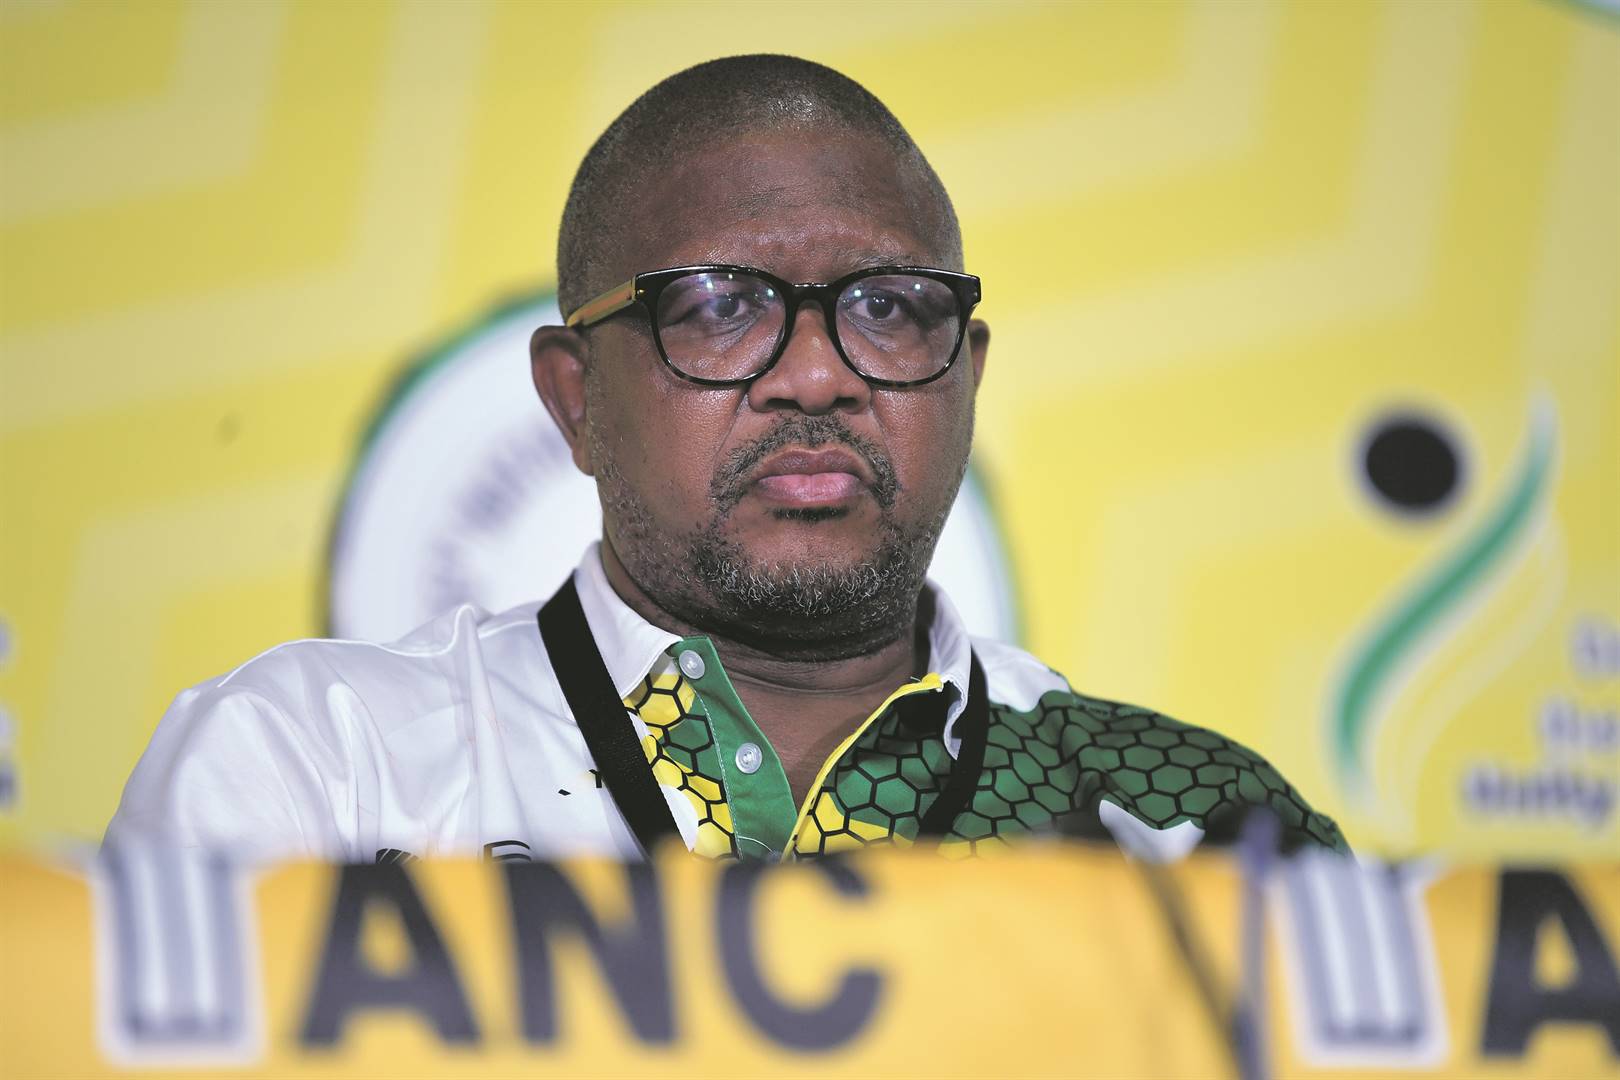 ‘Fix Eskom, Transnet’ to unlock growth, Mbalula says in call for ‘sensible’ reduction to govt spend | News24